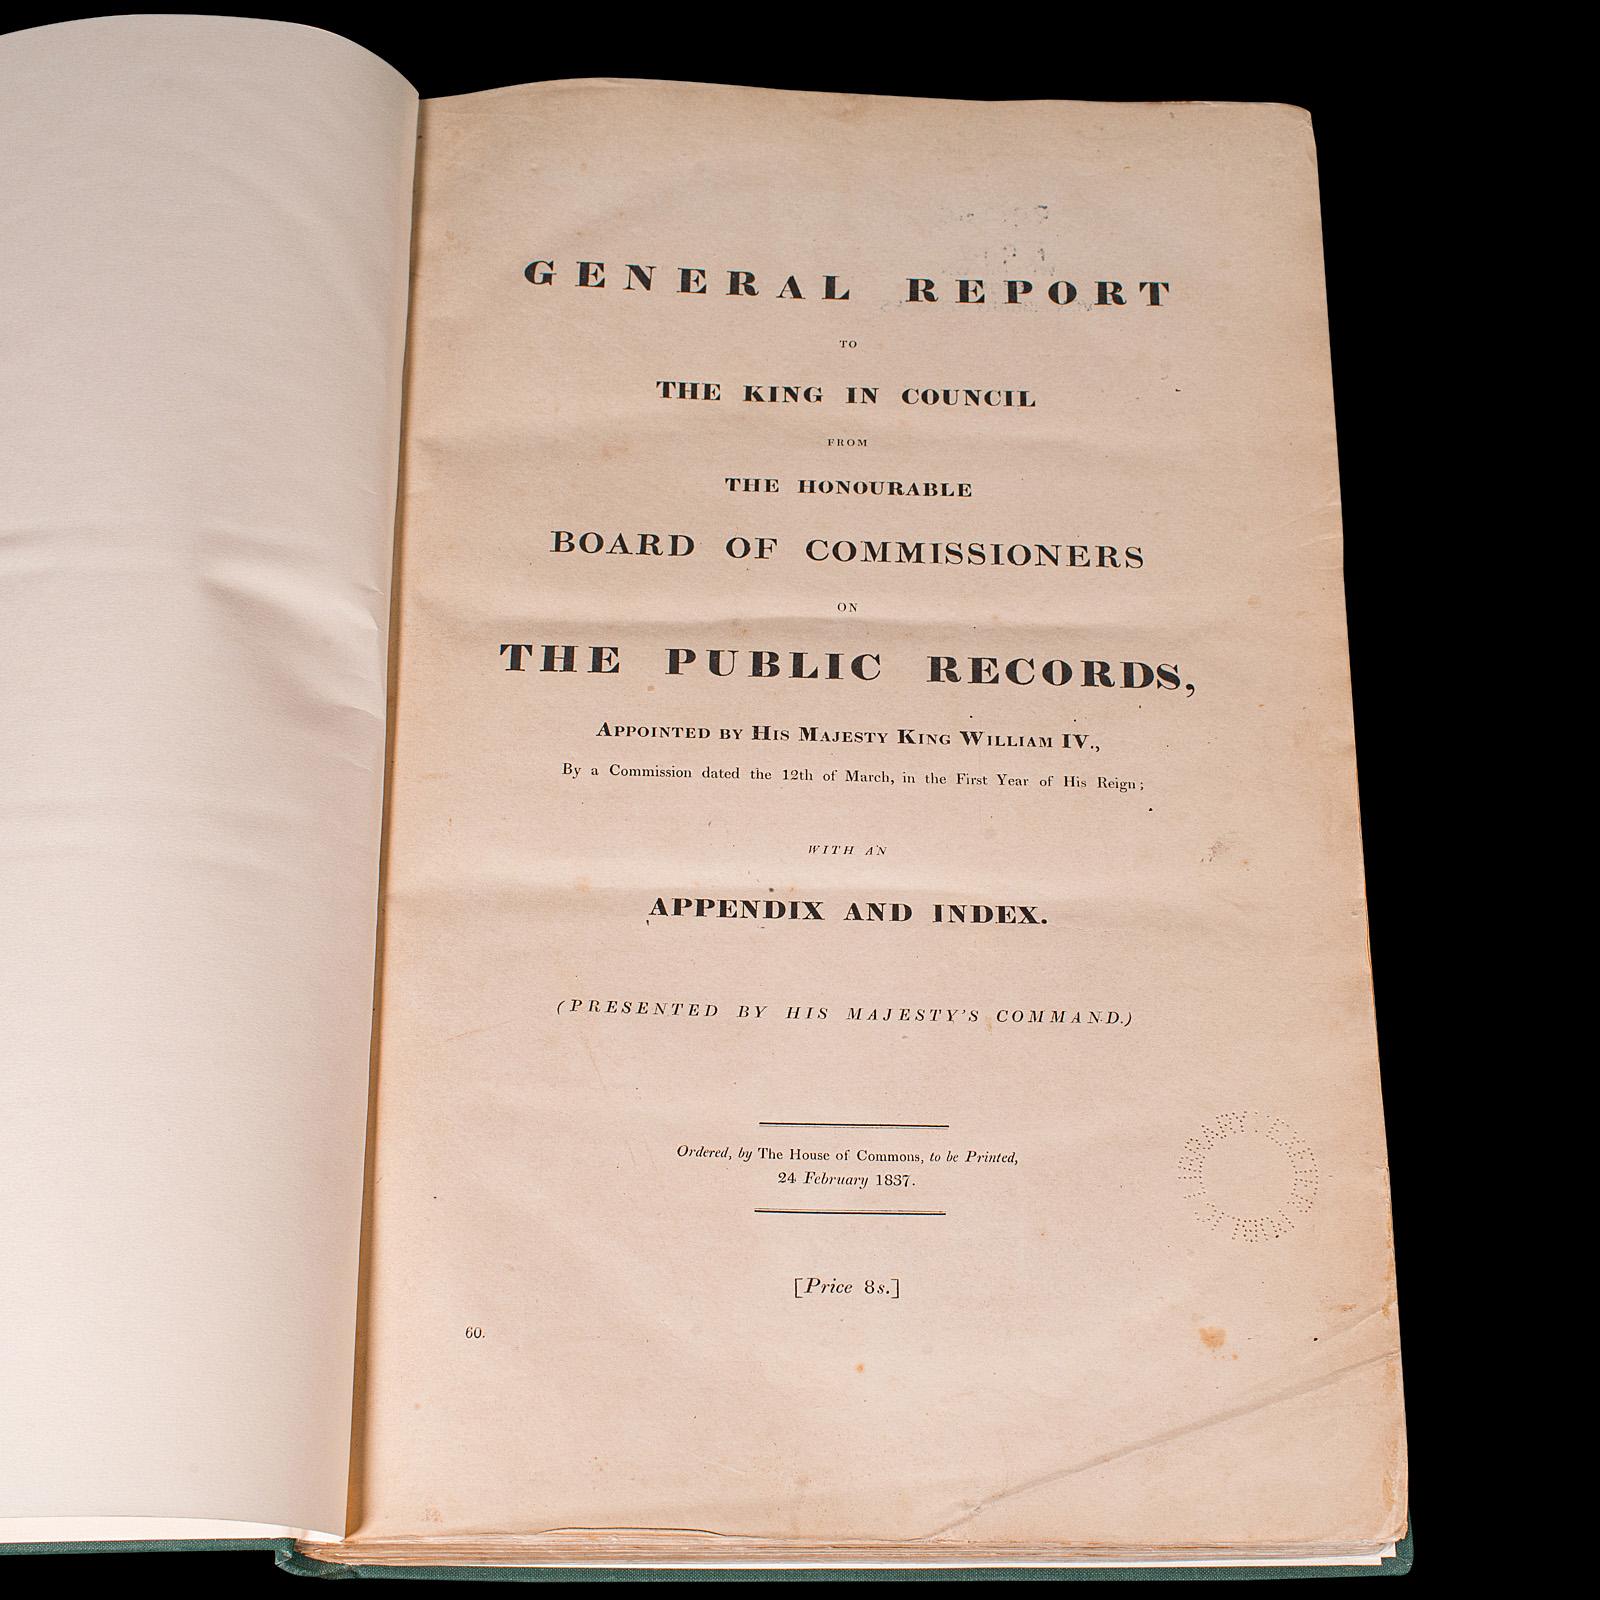 This is a large antique reference book, General Report on the Public Records. Printed in English, a later bound House of Commons record, dating to the William IV period, published 1837.

Full title: General Report to The King in Council from the